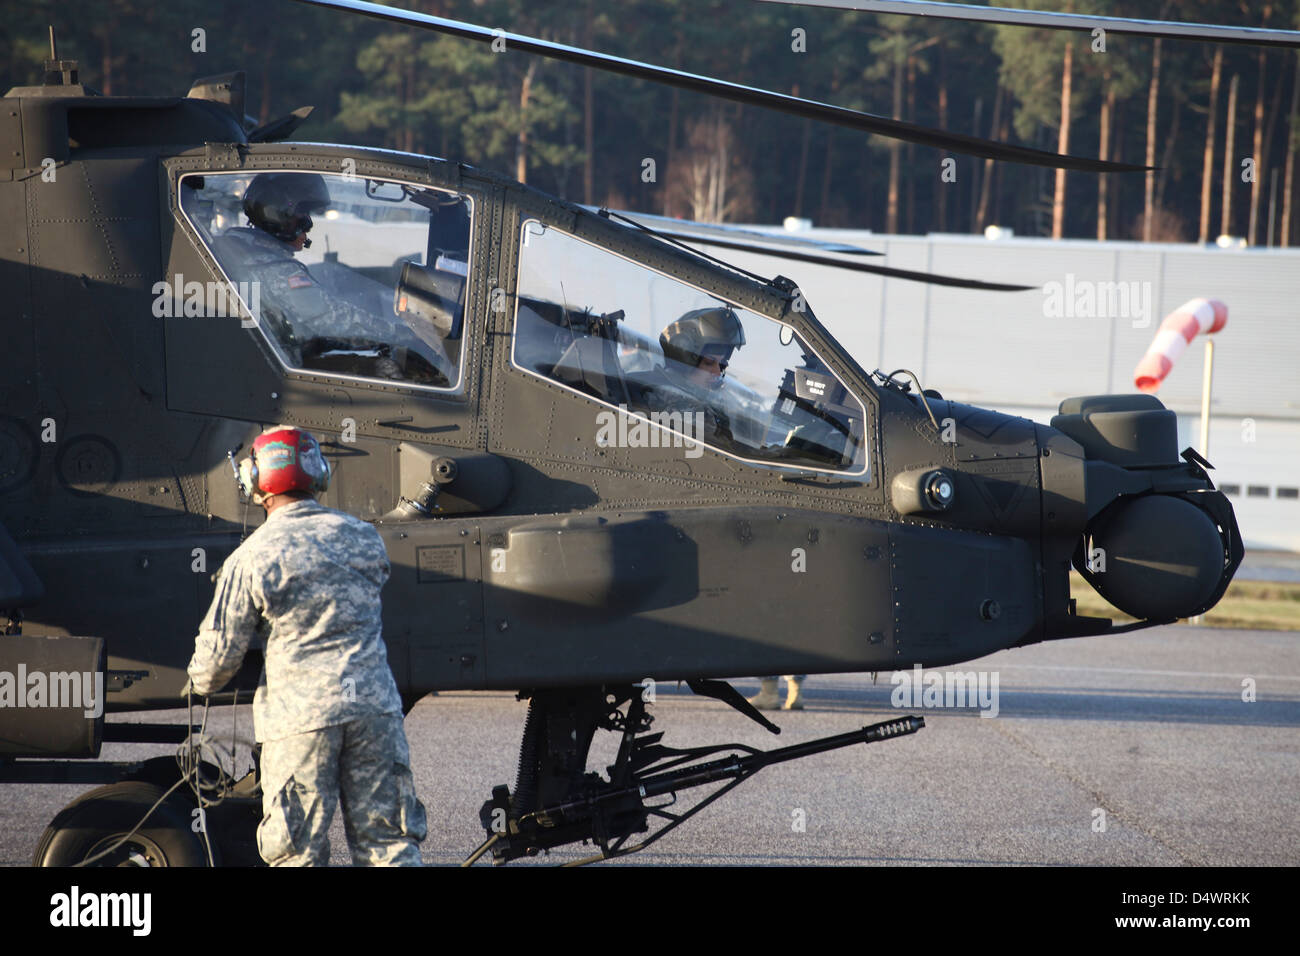 U.S. Army AH-64D Apache helicopter pilots conduct preflight checks at Letzlingen Army Training Center, Germany. Stock Photo